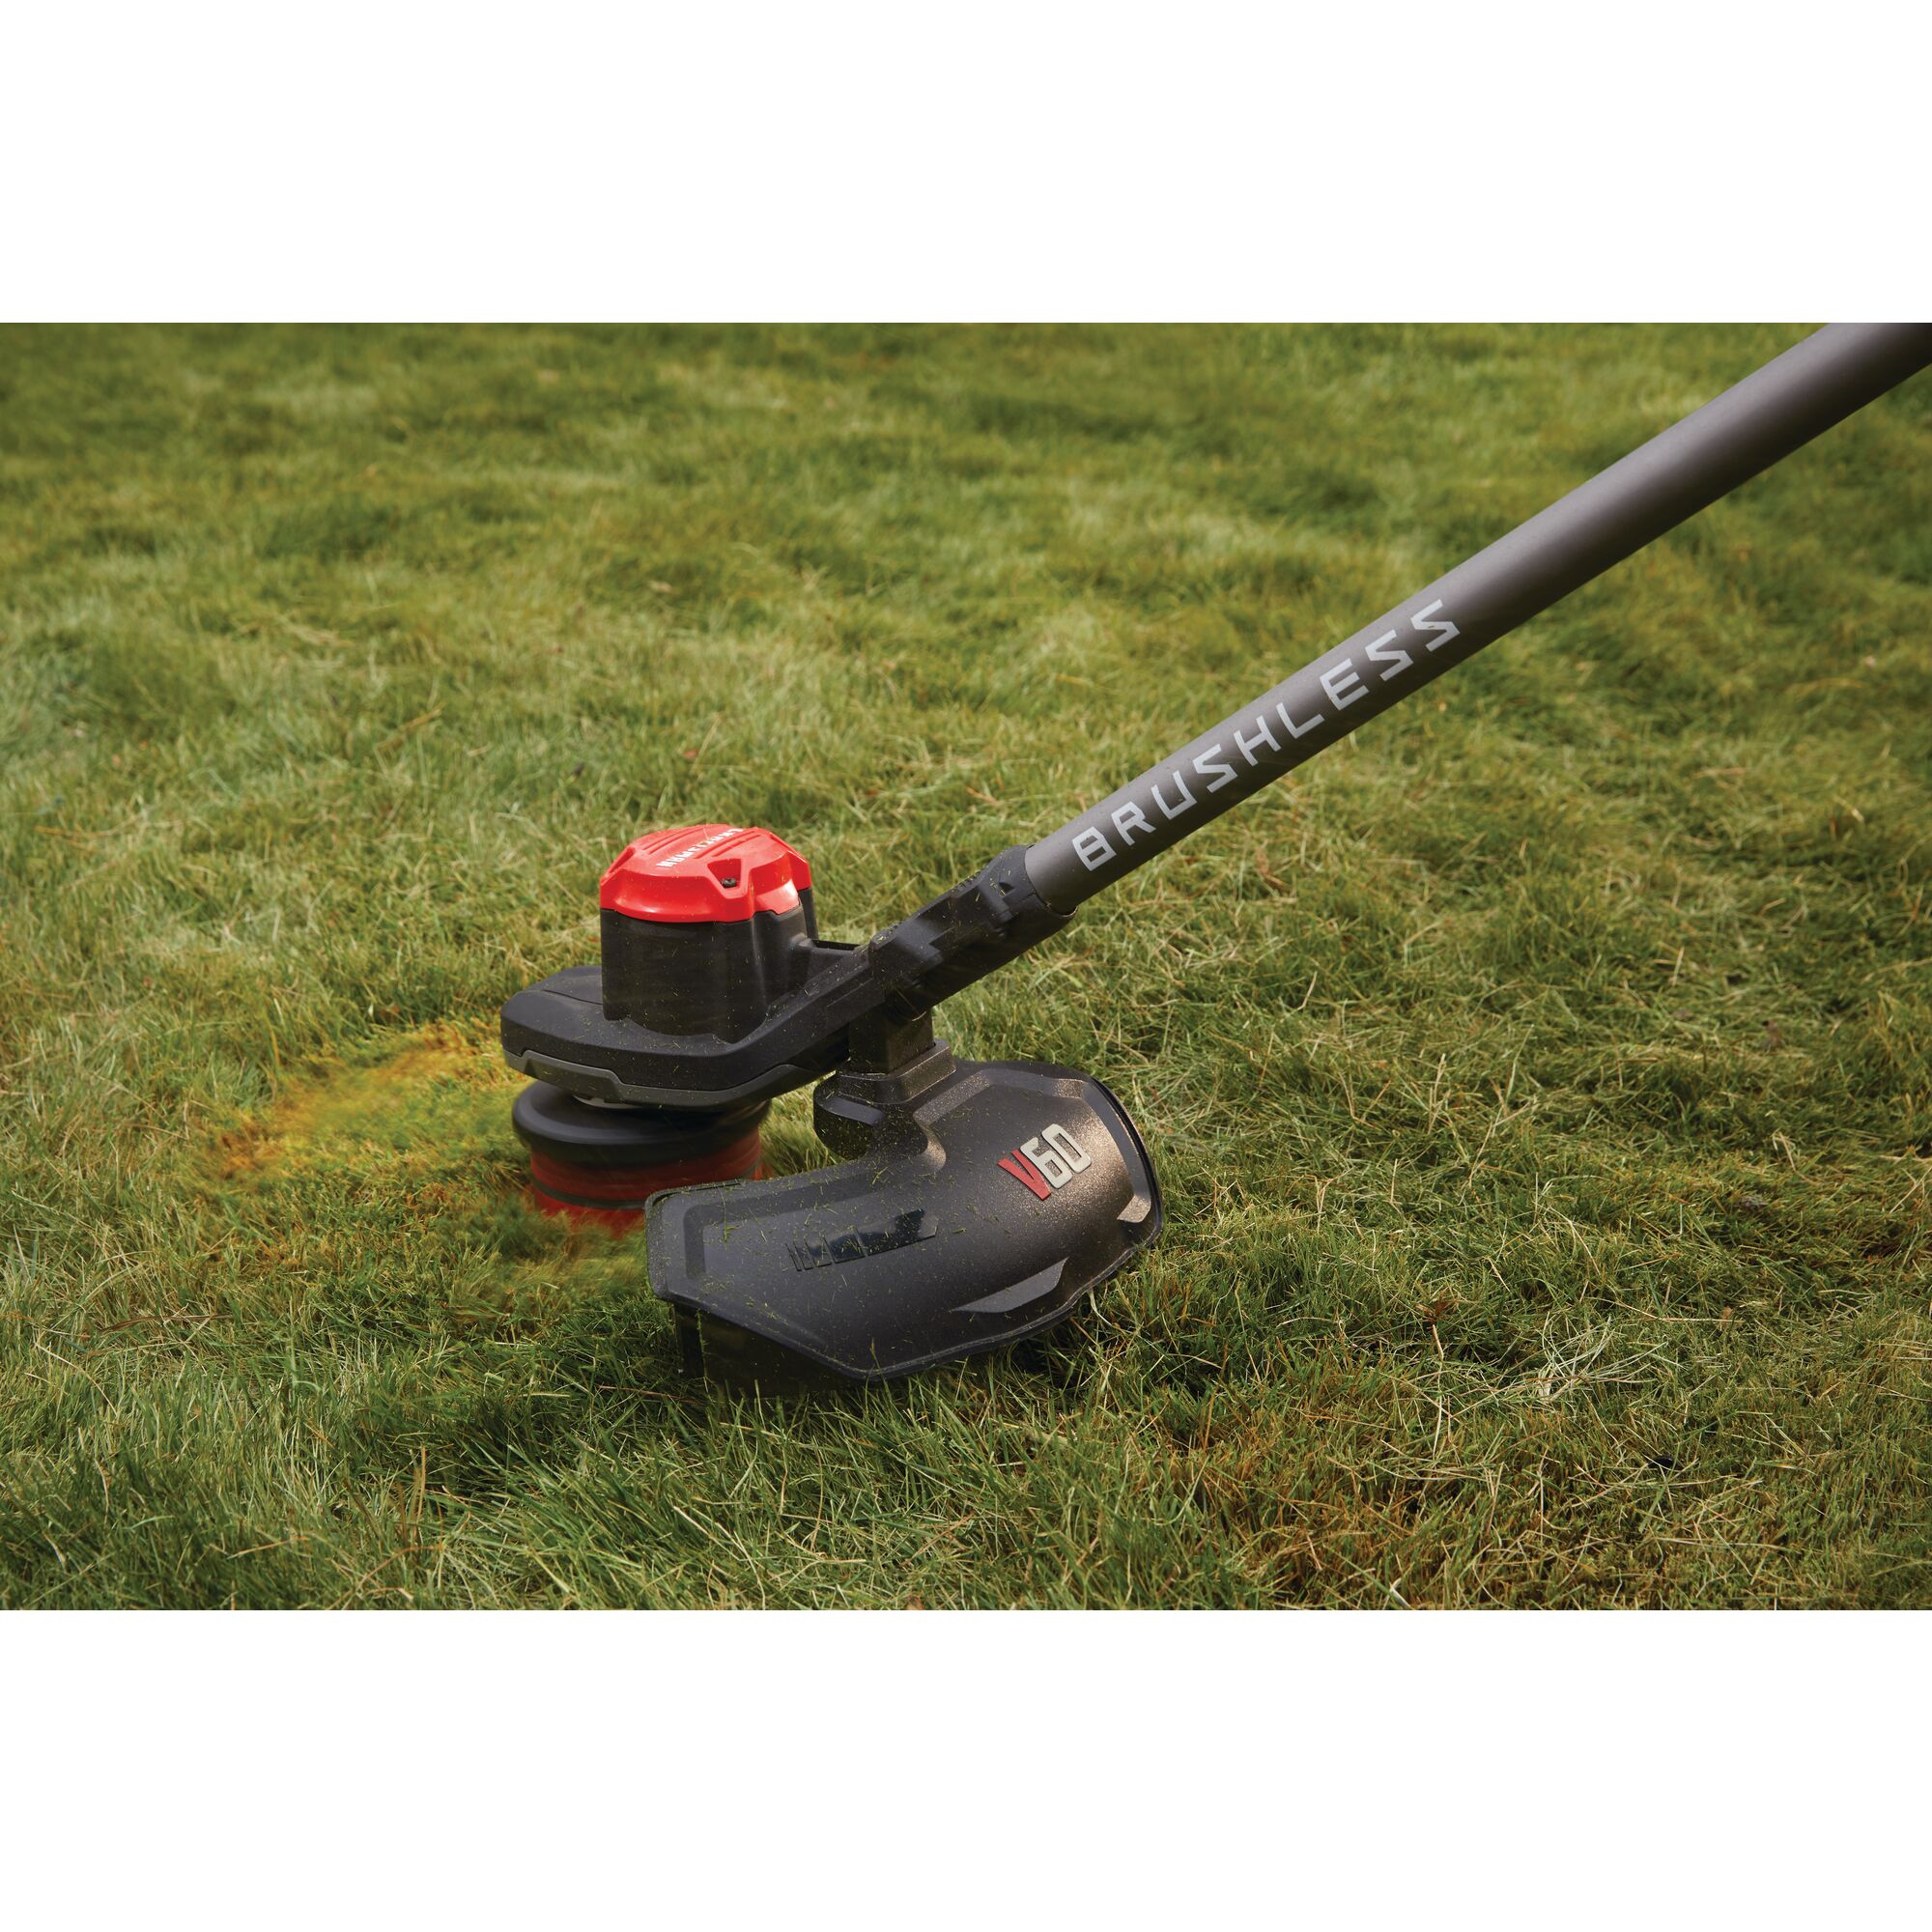 Quickwind spool system feature of 60 volt cordless 15 inch brushless weedwacker string trimmer with quickwind kit 2.5 ampere per hour.